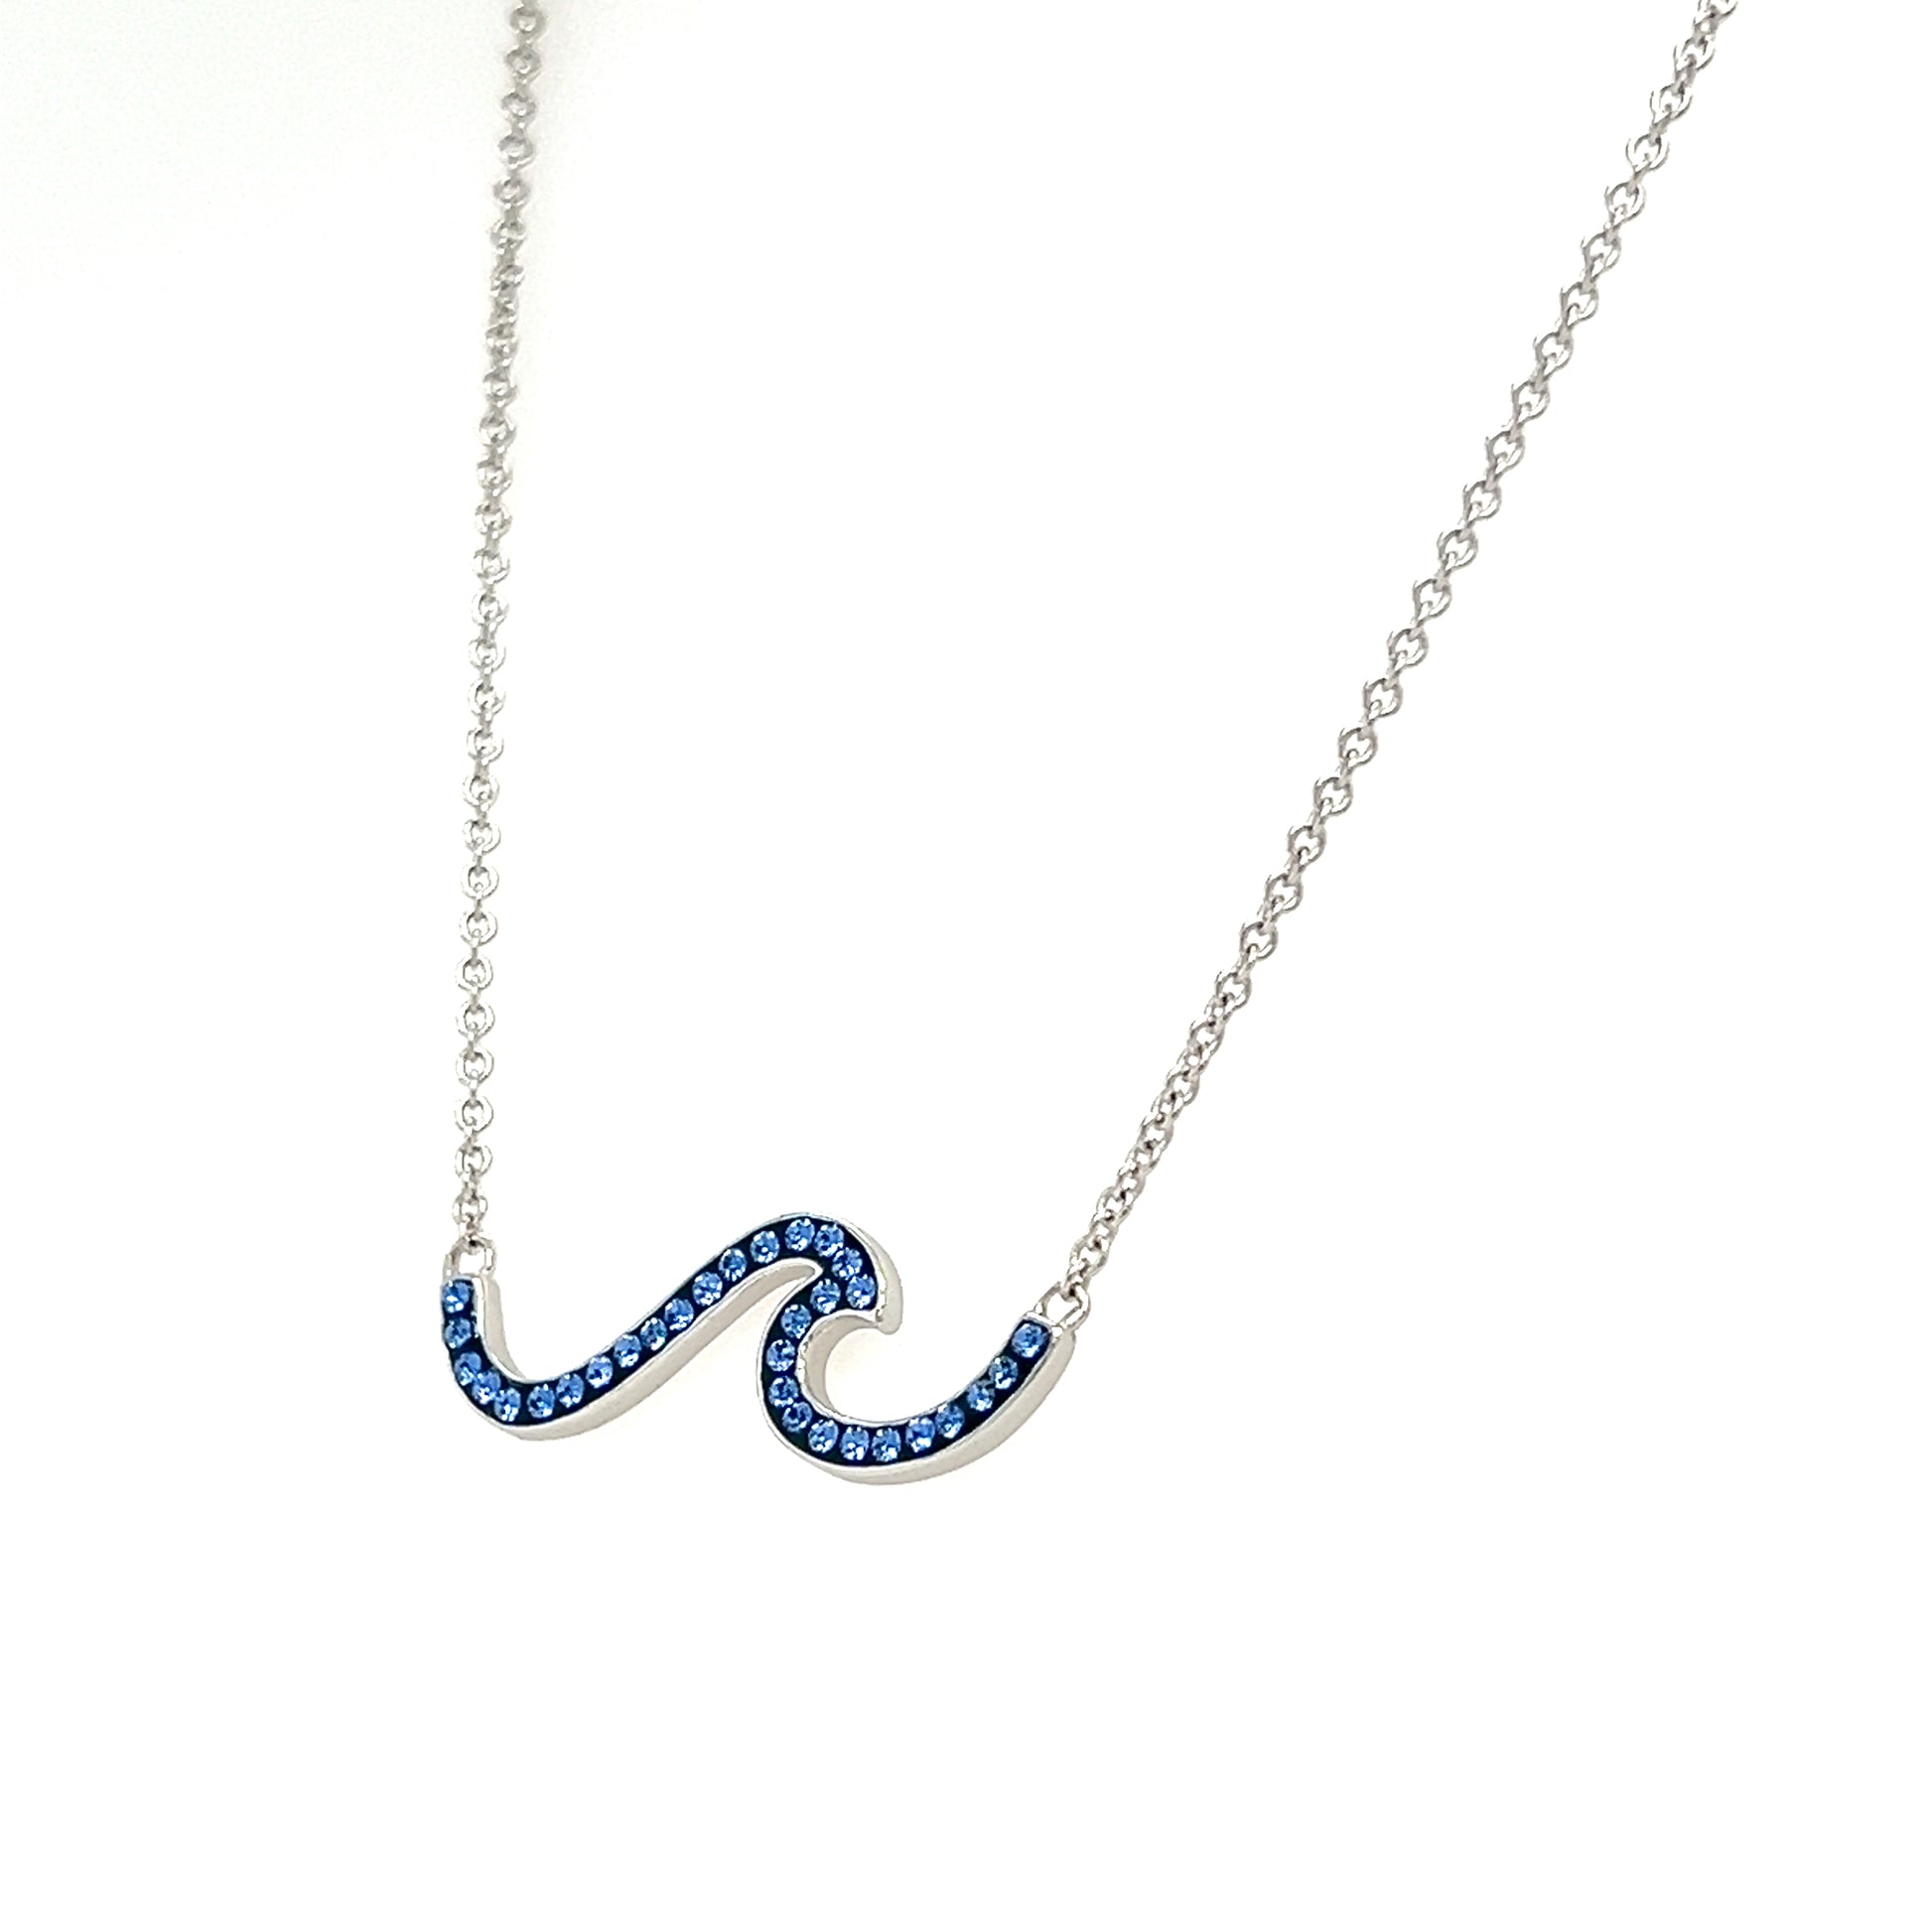 Blue Wave Necklace with Blue Crystals in Sterling Silver Right Side View